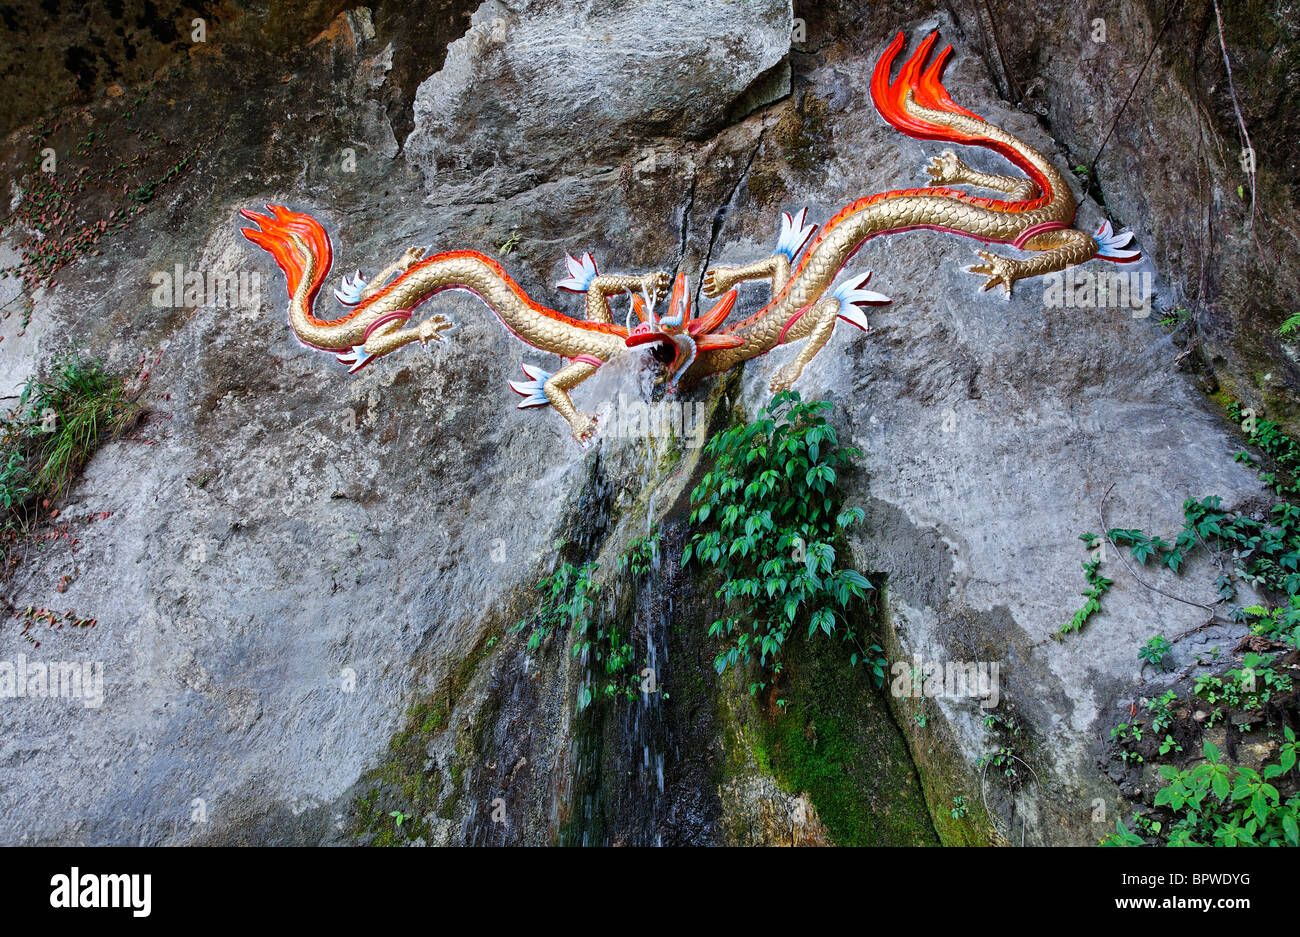 Dragon headed sculture in the rocks, Sikkim, India Stock Photo - Alamy